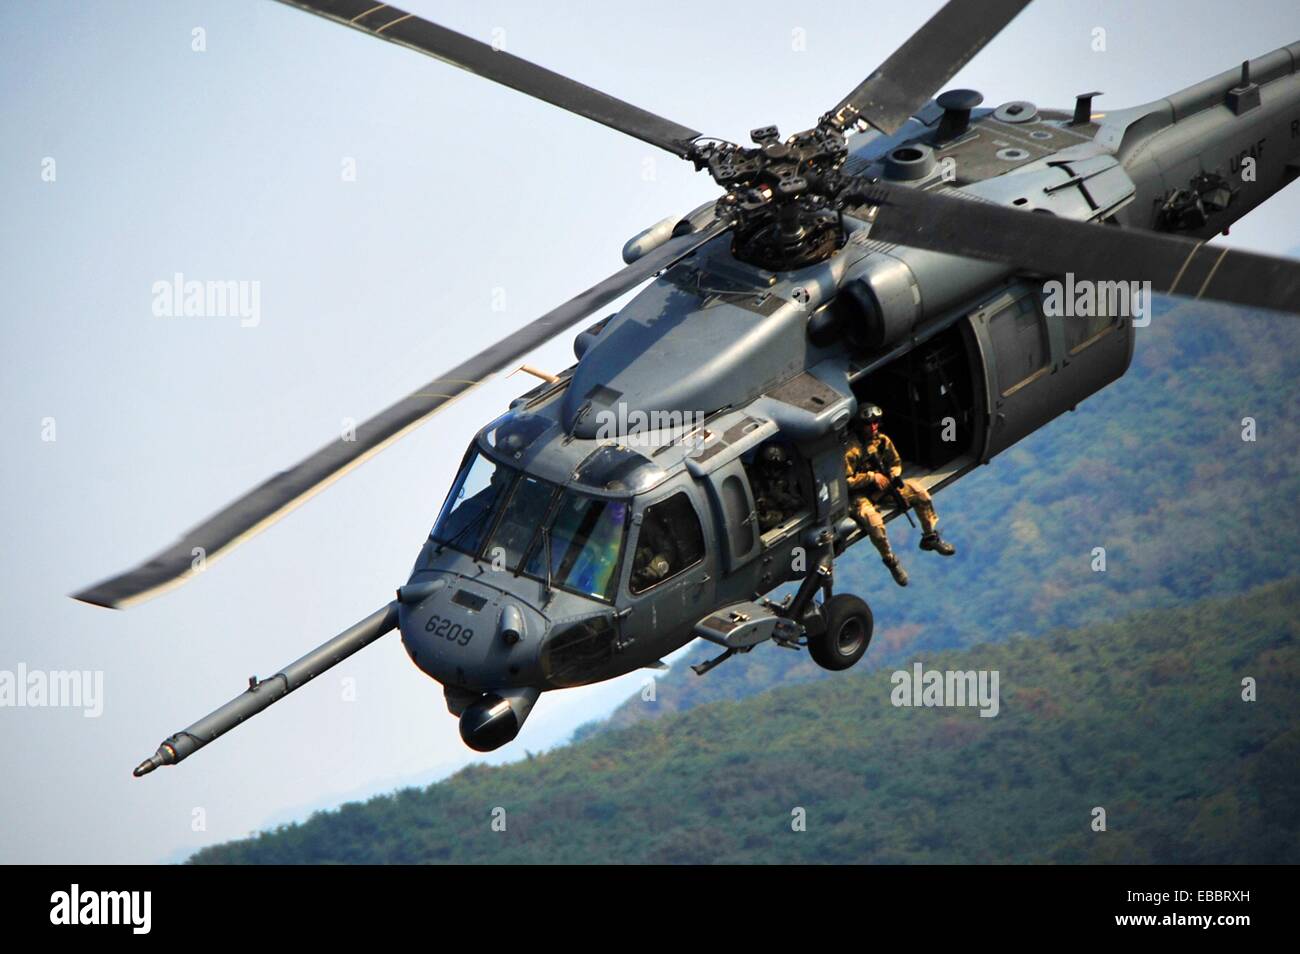 https://c8.alamy.com/comp/EBBRXH/members-of-the-33rd-rescue-squadron-fly-an-hh-60g-pave-hawk-at-osan-EBBRXH.jpg